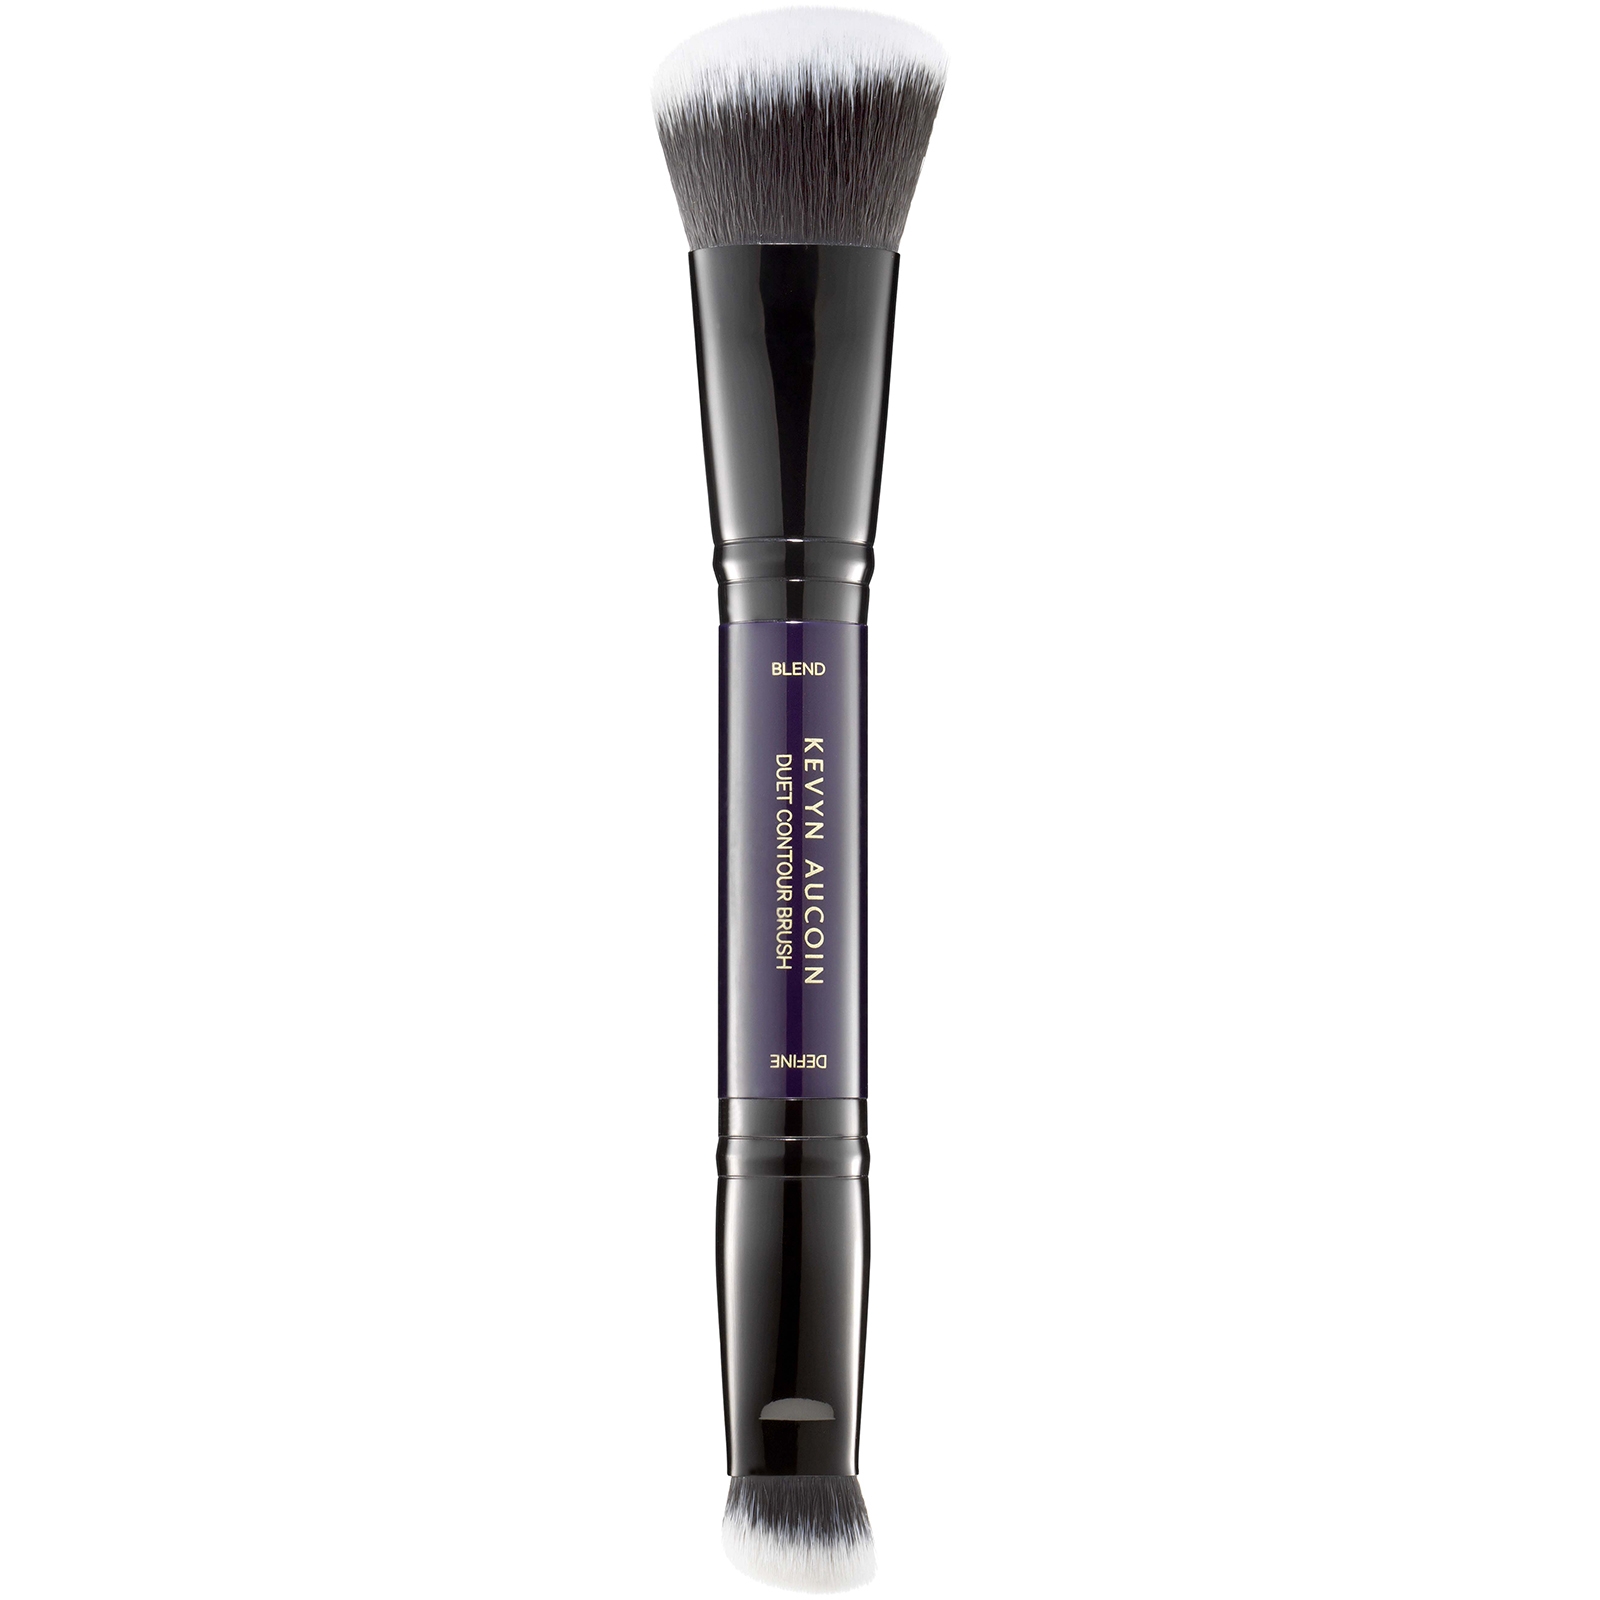 Image of Kevyn Aucoin The Duet Contour Brush